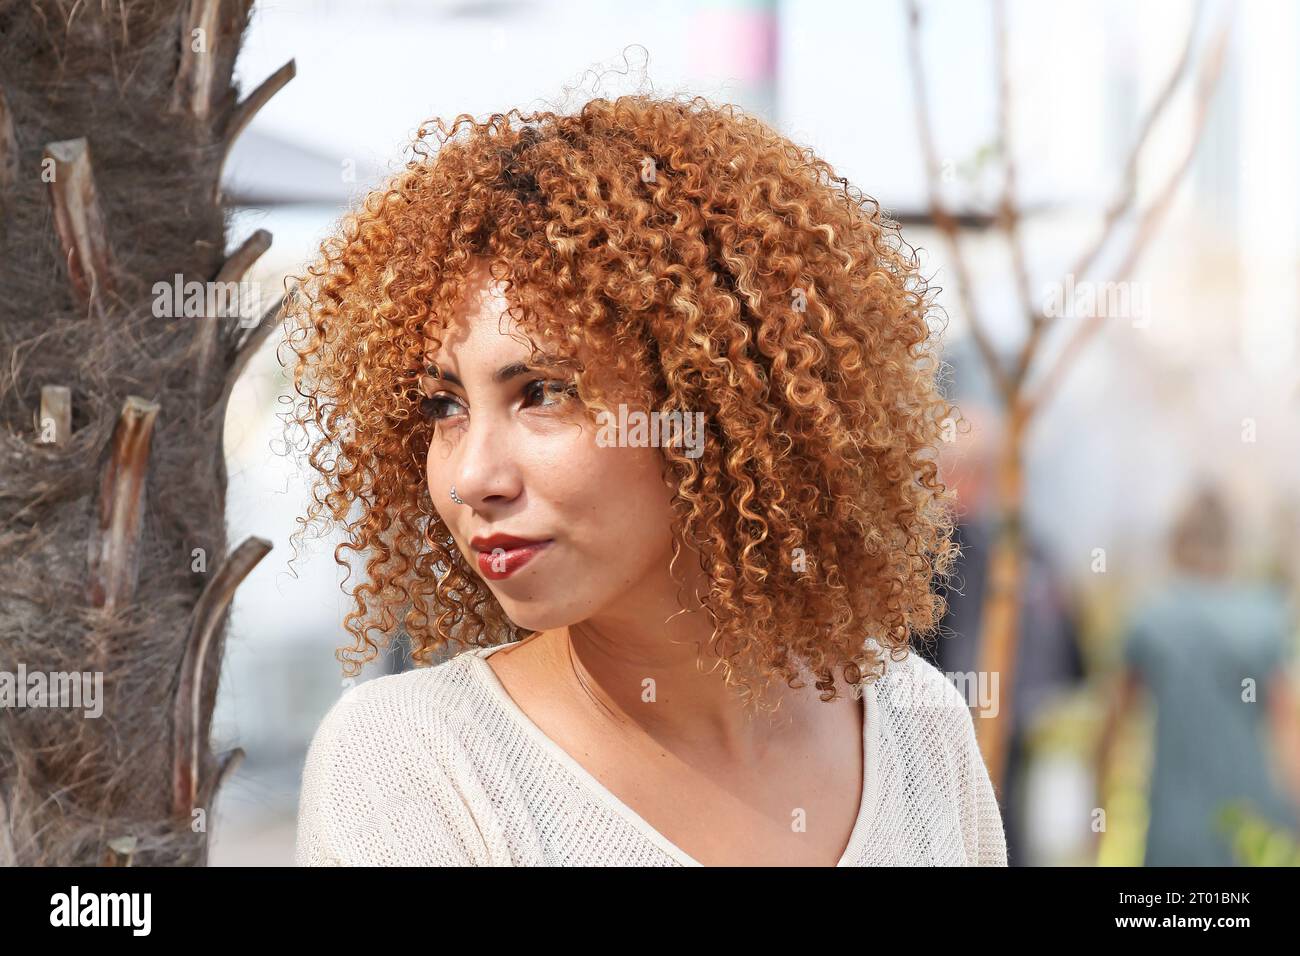 Curly hair woman in white sweater and red pants having a good time outside under a palmer tree in a tropical country Stock Photo